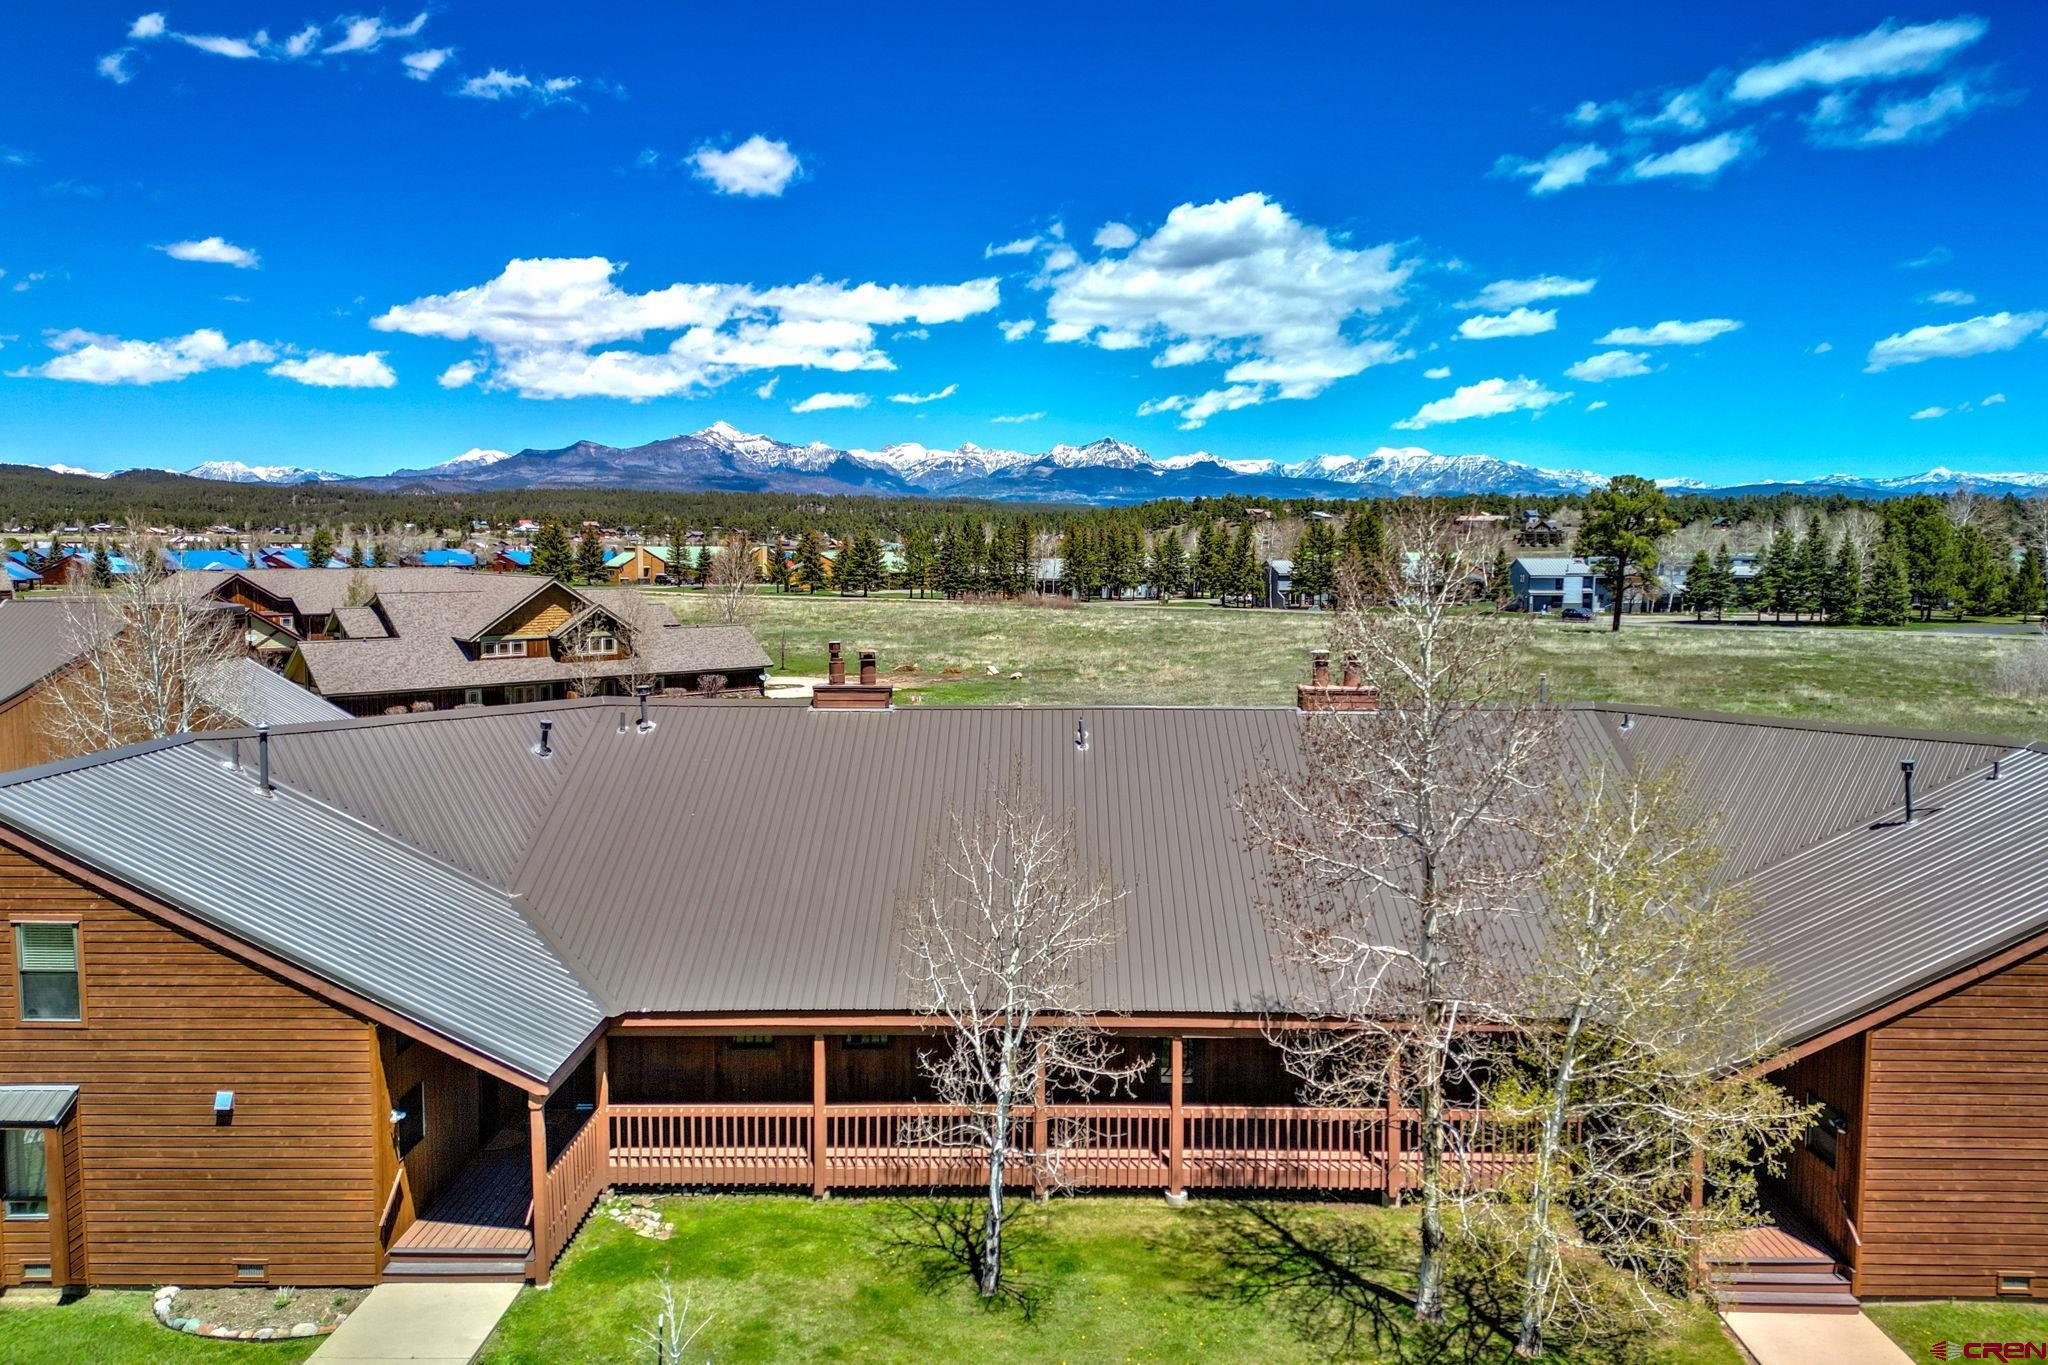 Photo of 301 Talisman Dr #4313 in Pagosa Springs, CO